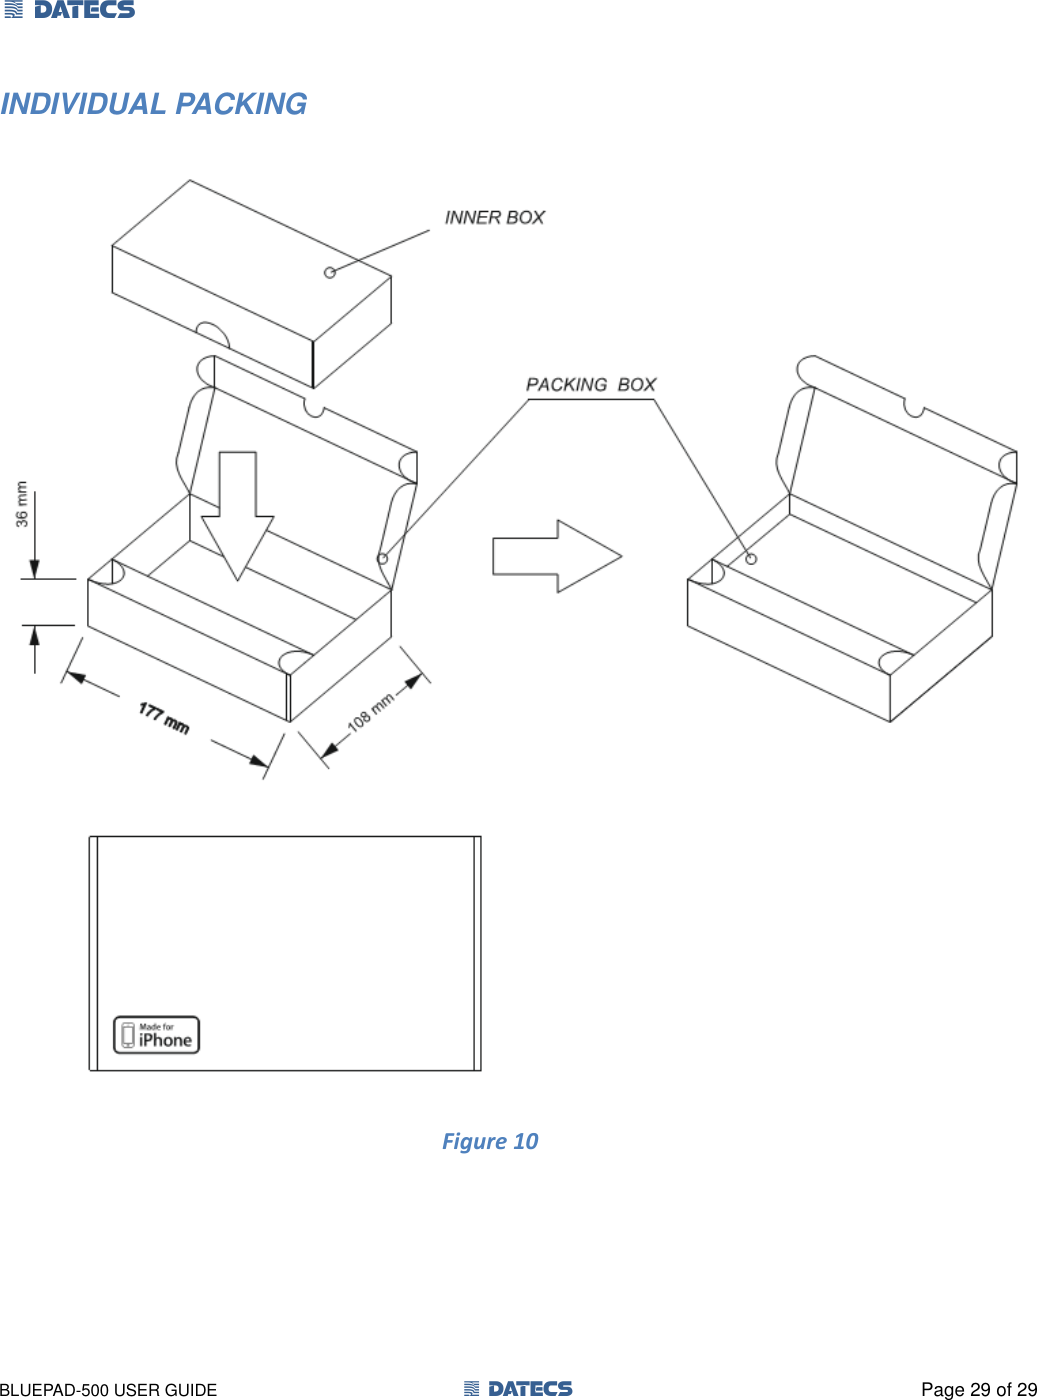 1 DATECS       BLUEPAD-500 USER GUIDE  1 DATECS  Page 29 of 29 INDIVIDUAL PACKING  Figure 10  